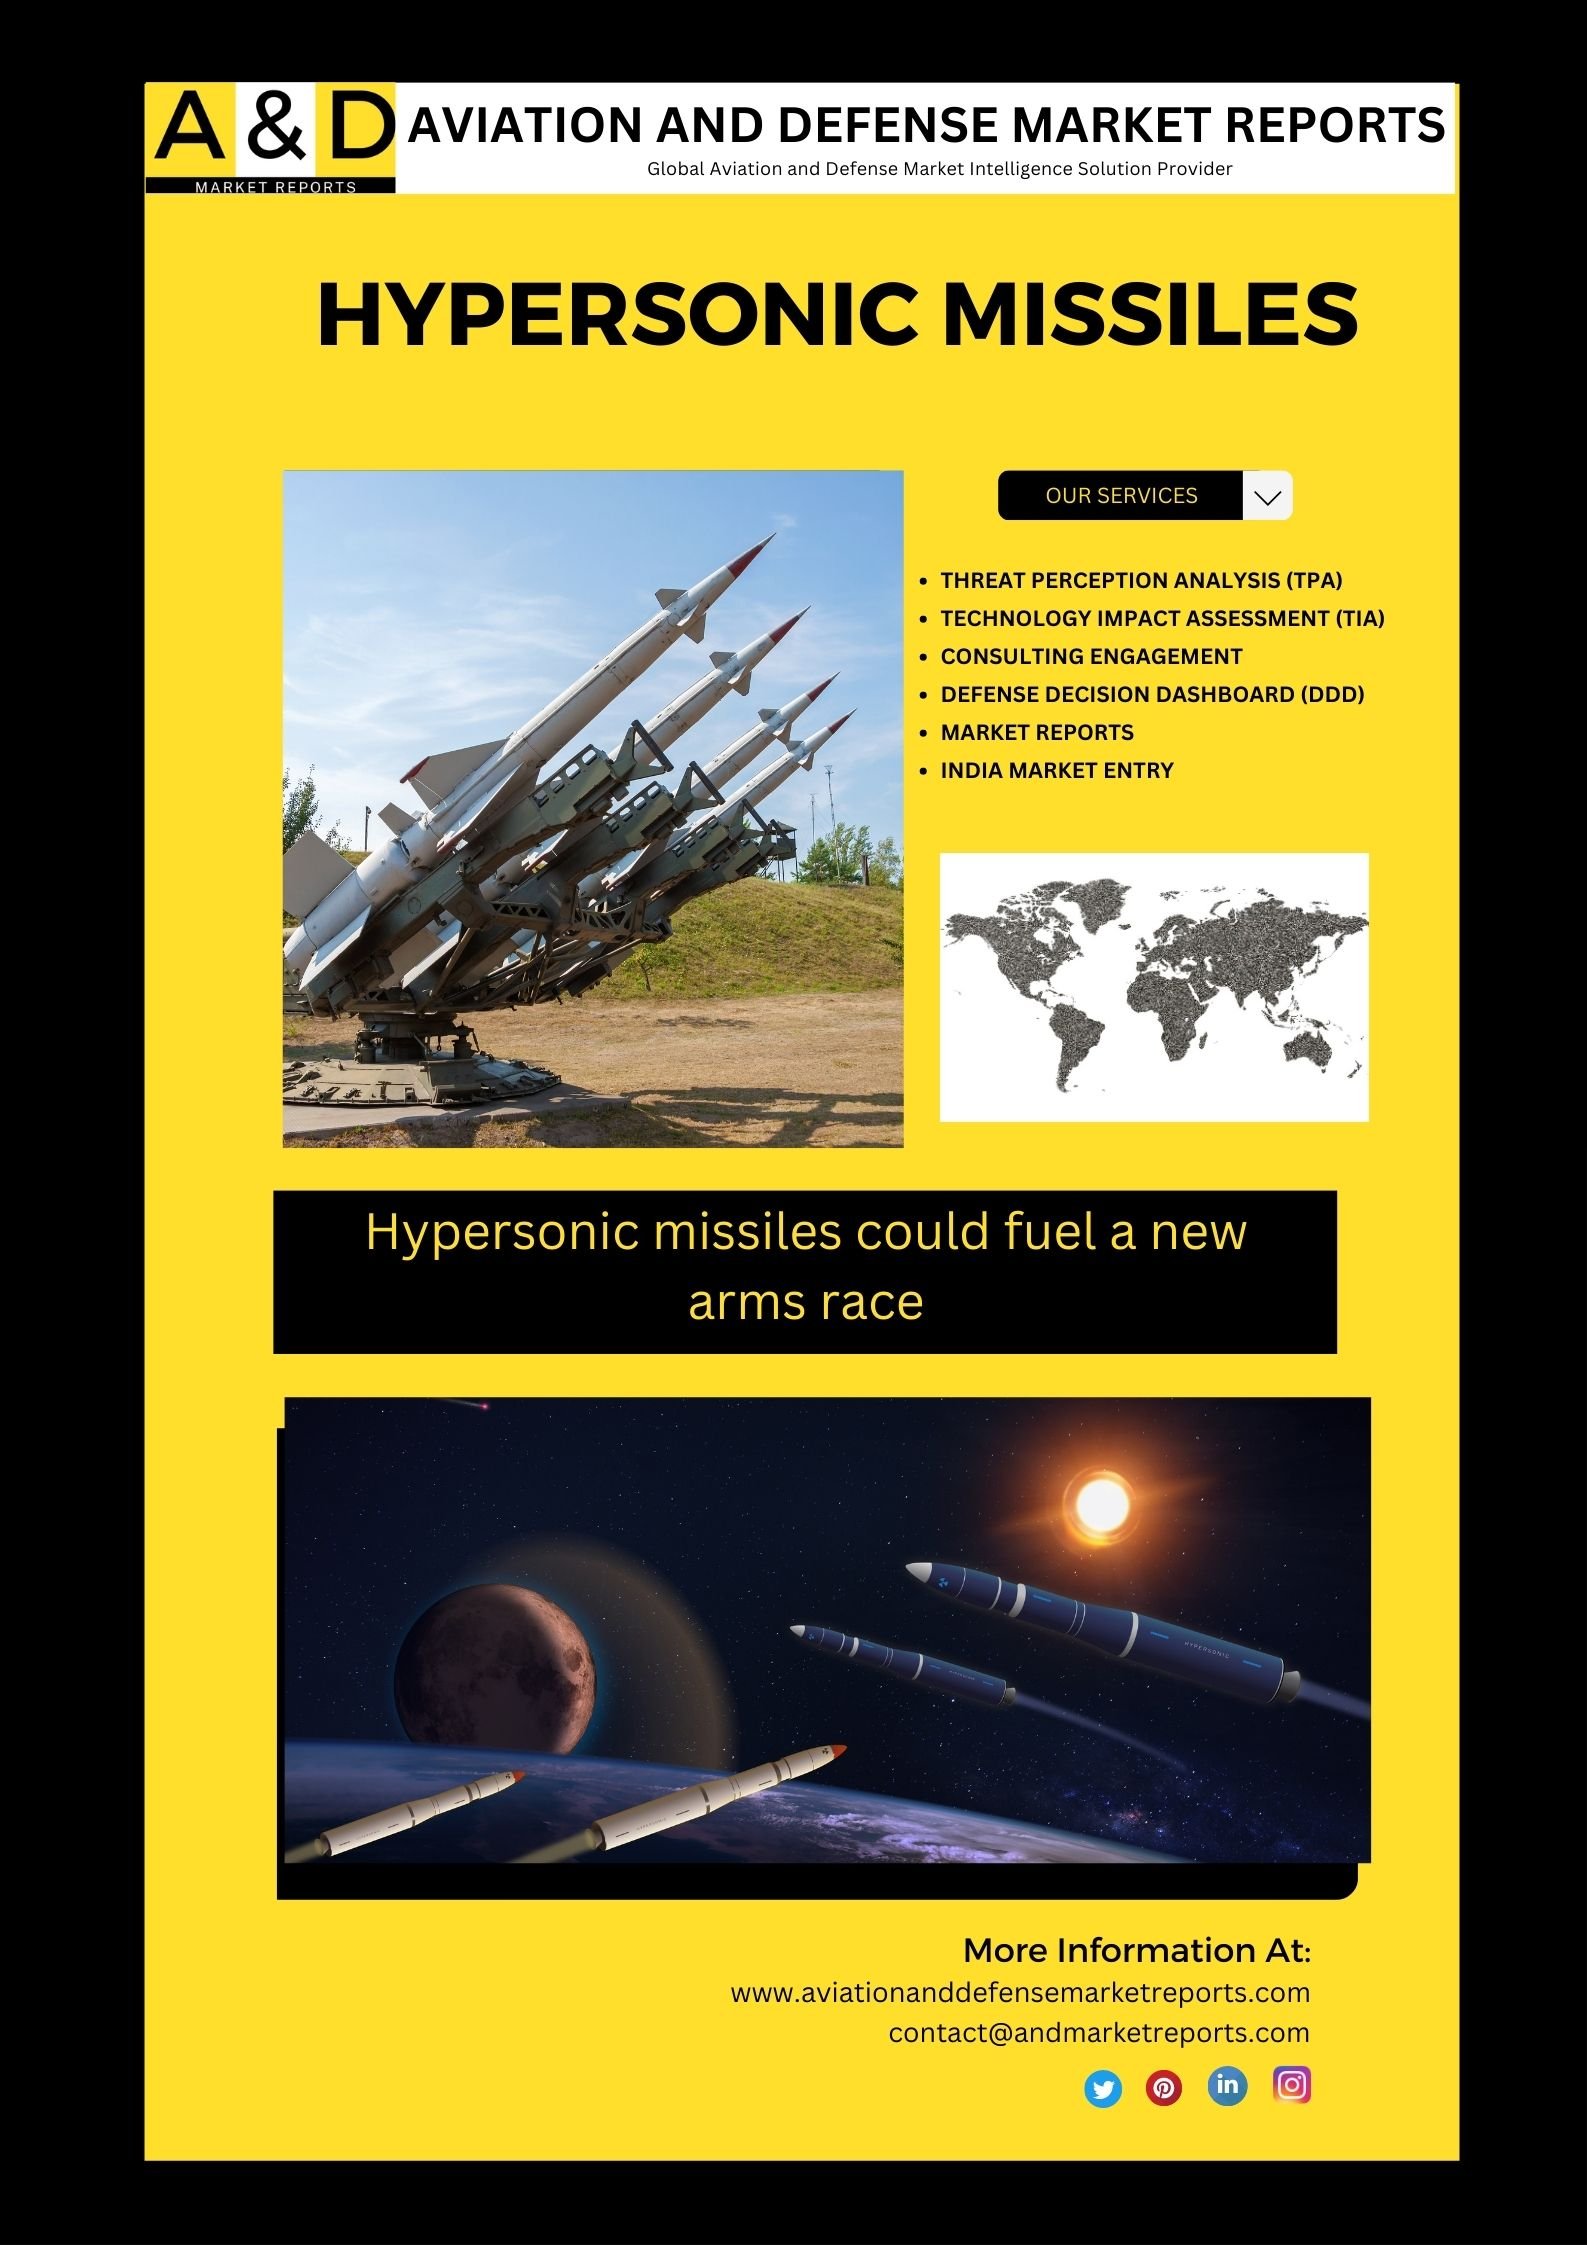 Will the growth of Hypersonic Missiles render Air Defense capabilities ineffective?